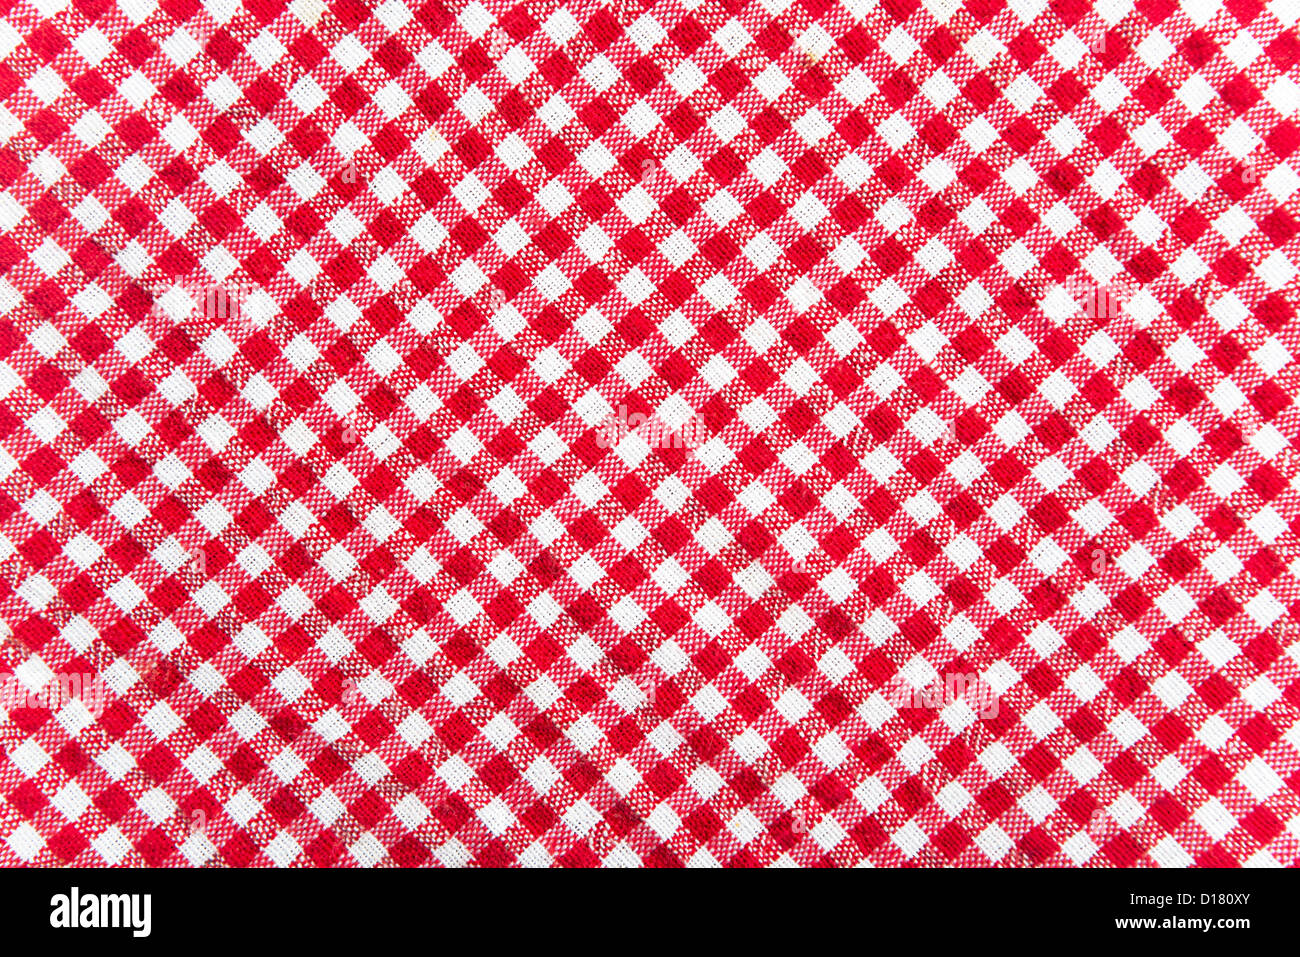 red and white table cloth texture. abstract background Stock Photo